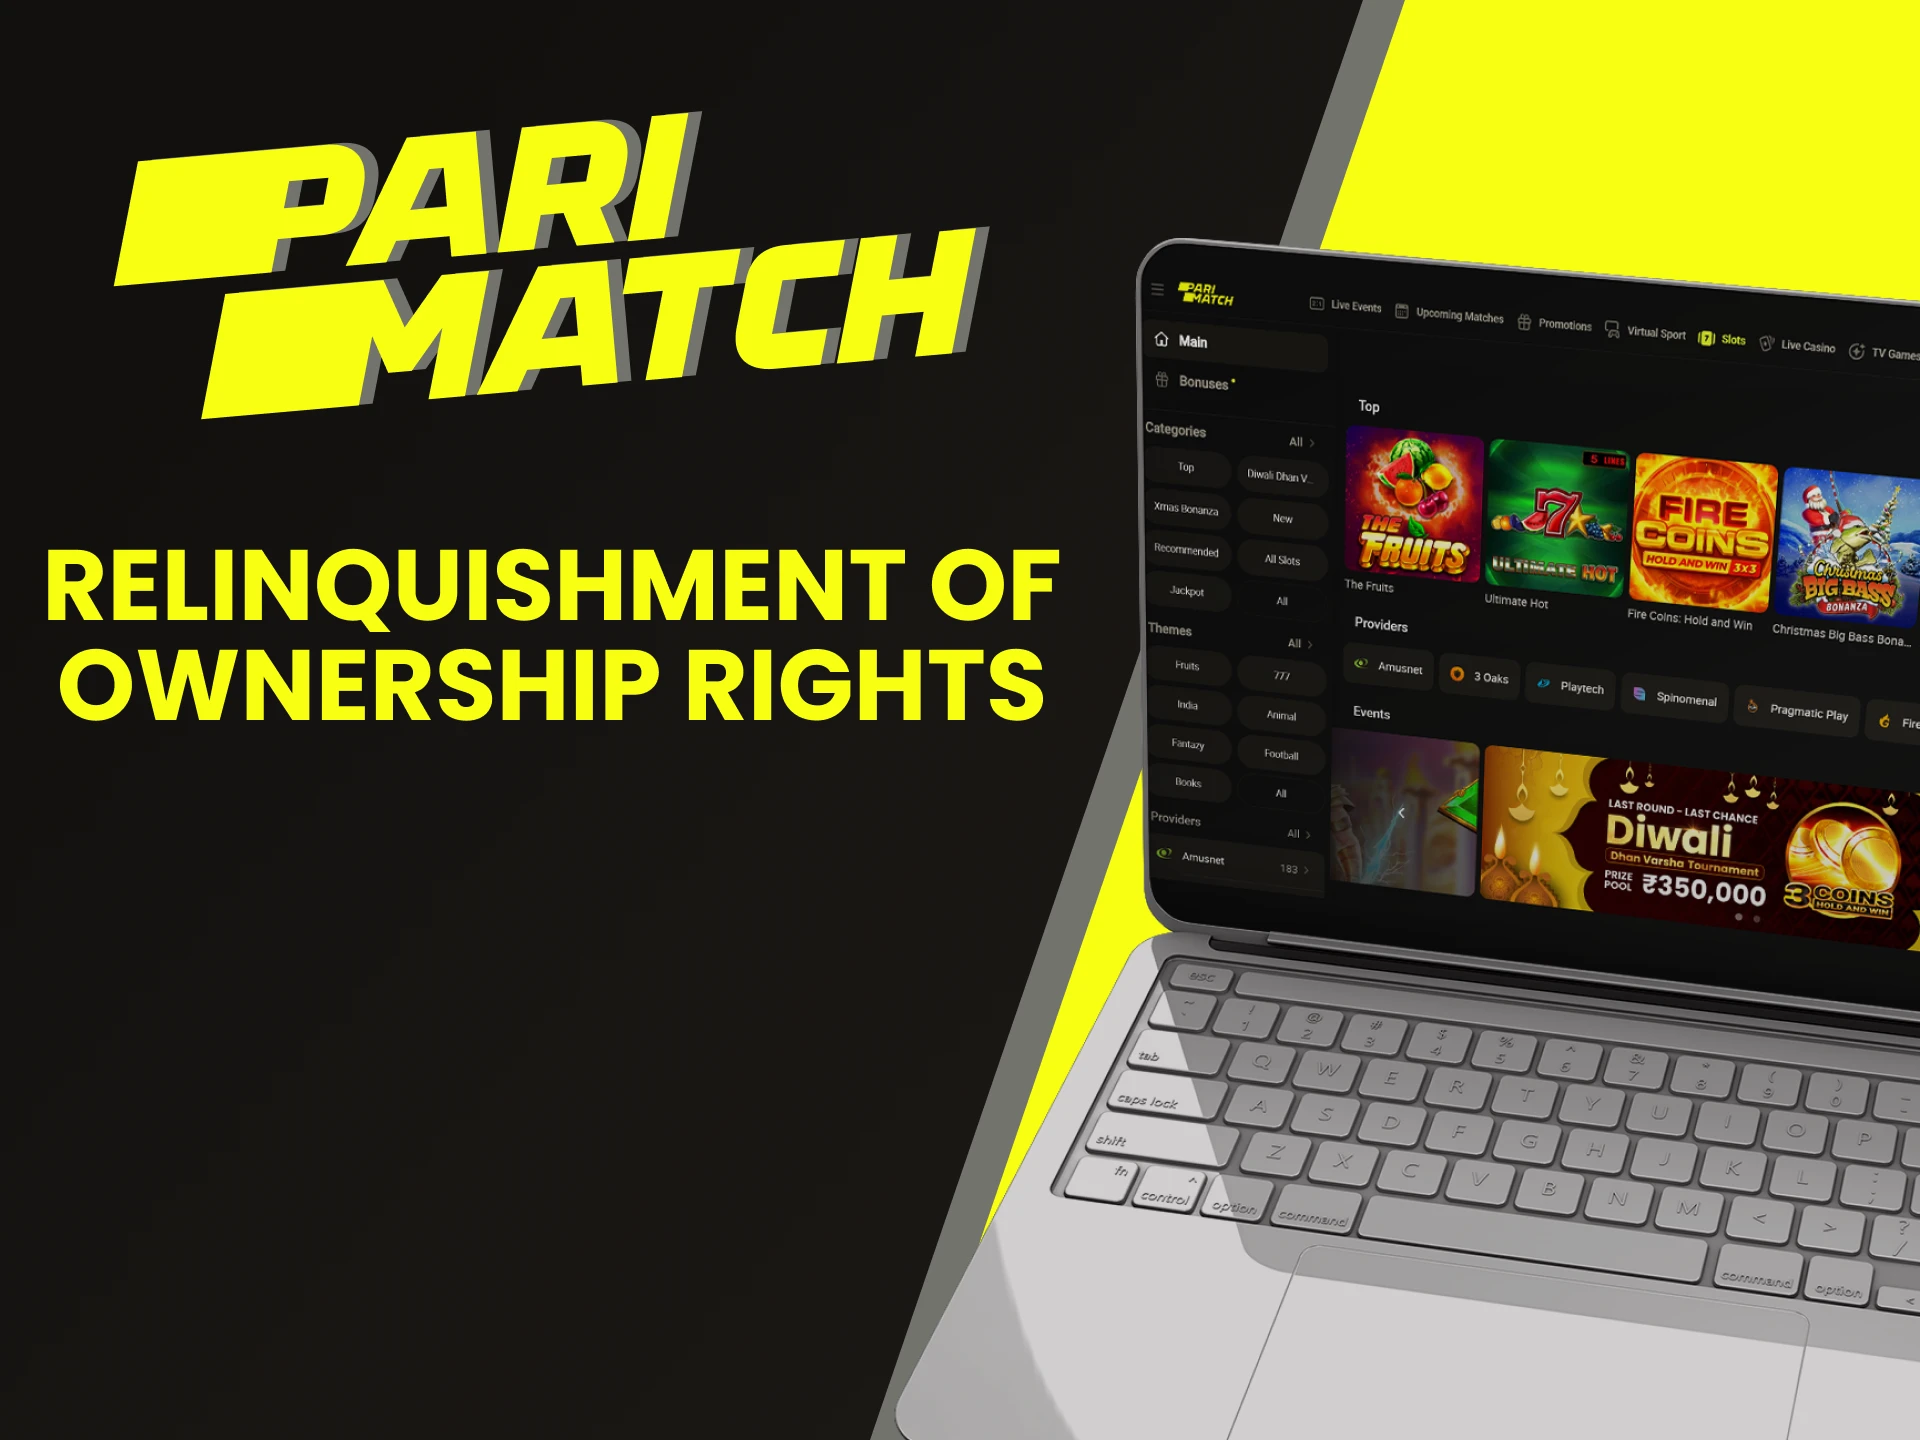 Find out who owns the Parimatch brand.